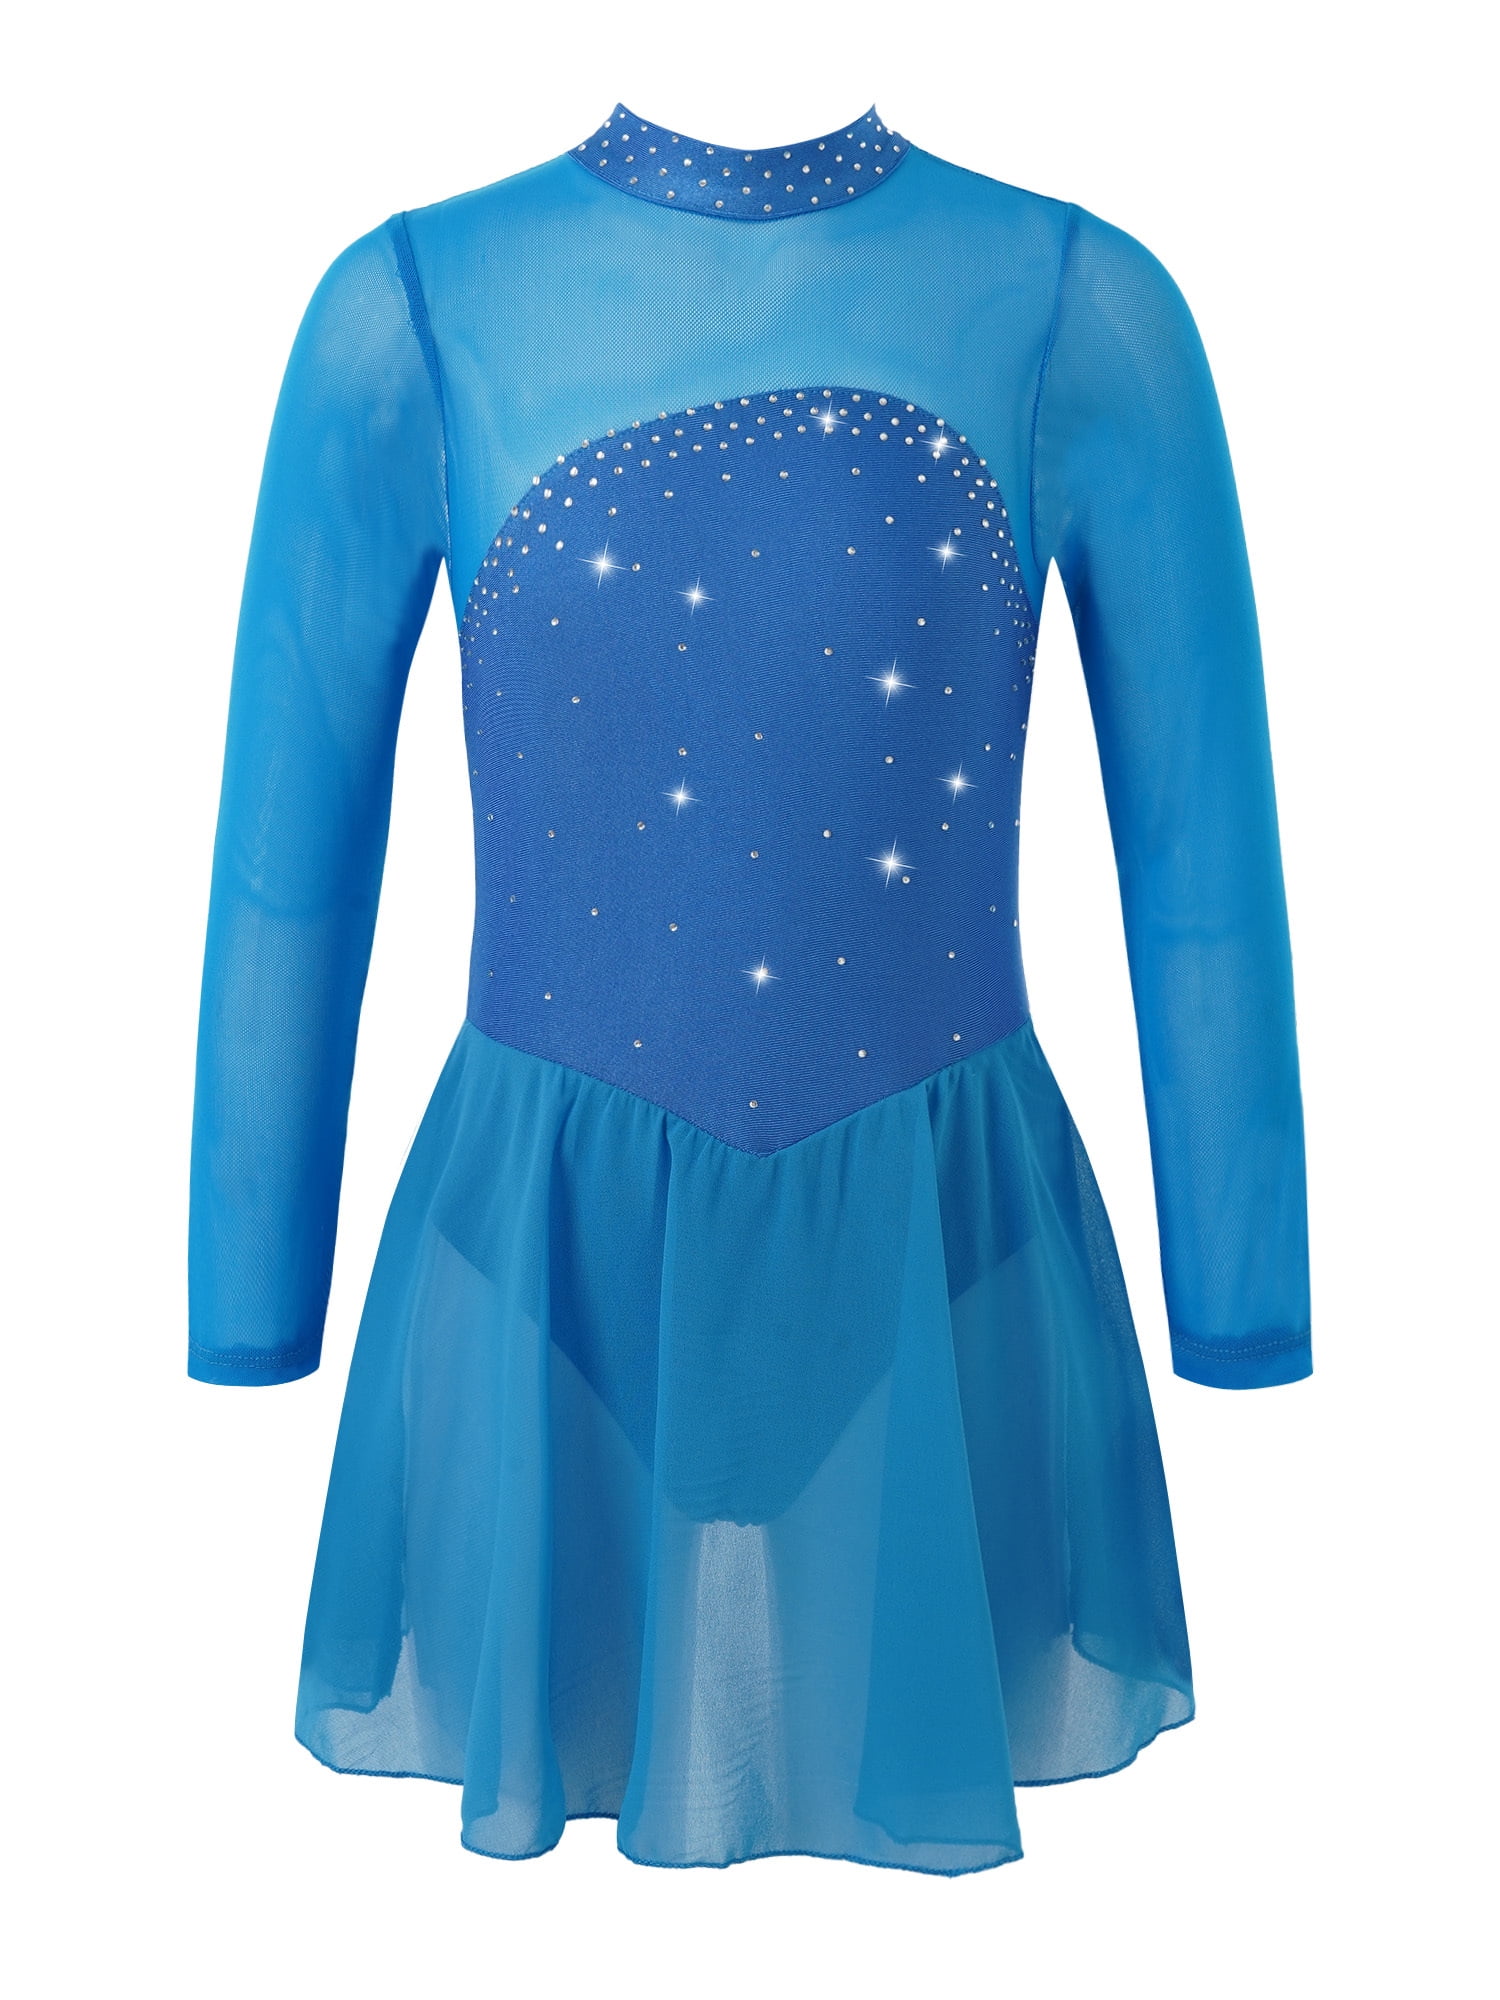 Details about   White Girl Competition Figure skating Dress Ice Skating Dress Costume Sparkle 